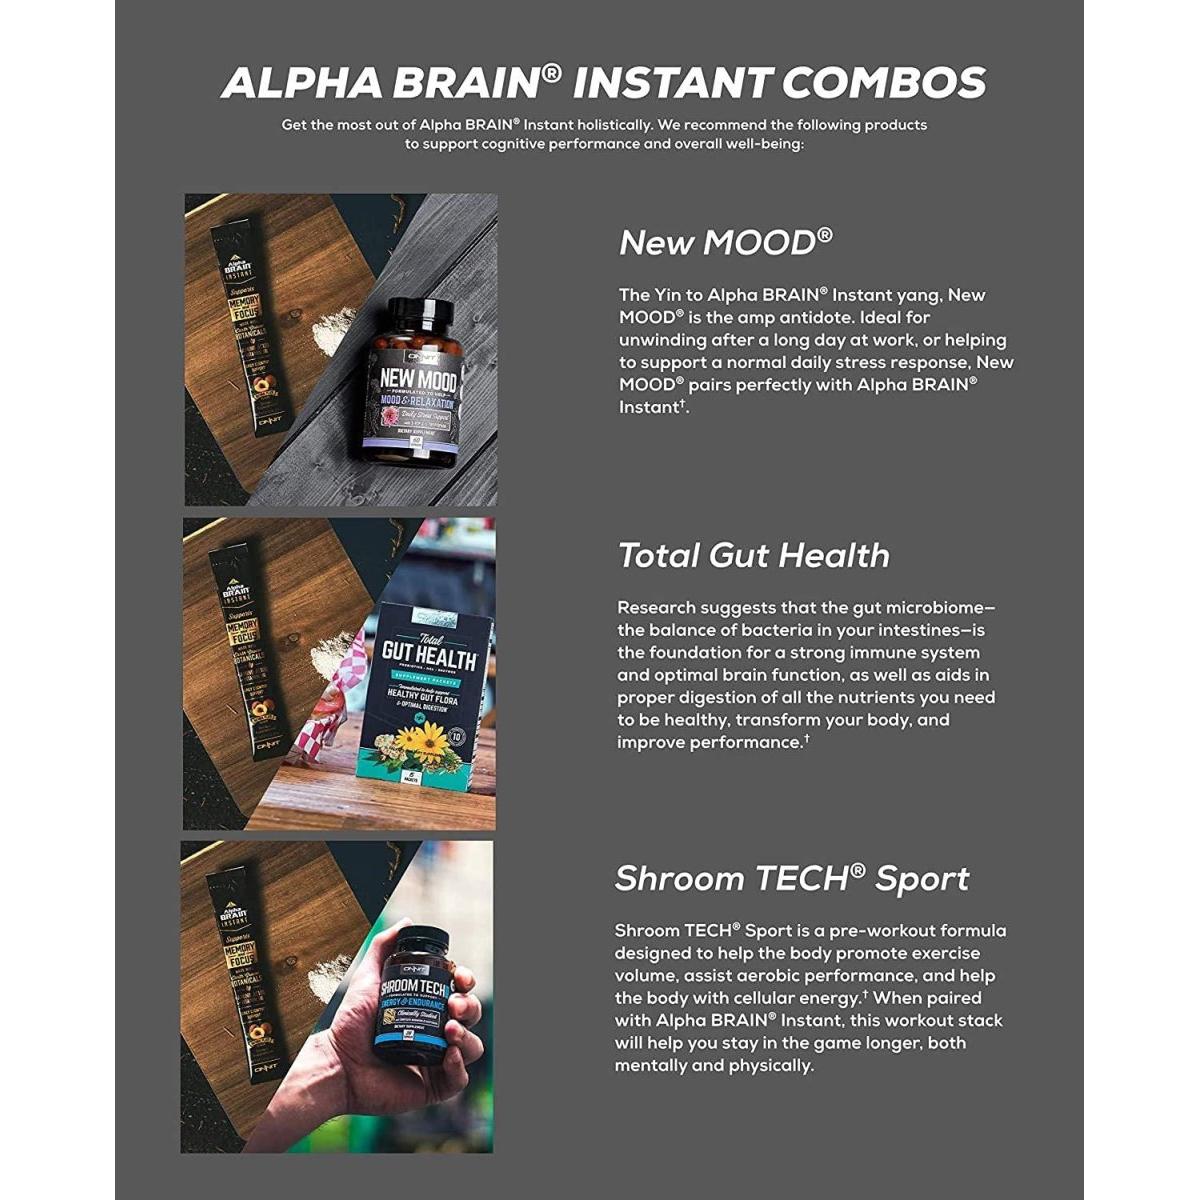 Onnit Alpha Brain Instant - Meyer Lemon Flavor - Nootropic Brain Booster Memory Supplement - for Focus, Energy & Clarity - Alpha GPC Choline, Cats Claw, L-Theanine, Bacopa - 30Ct - Glam Global UK